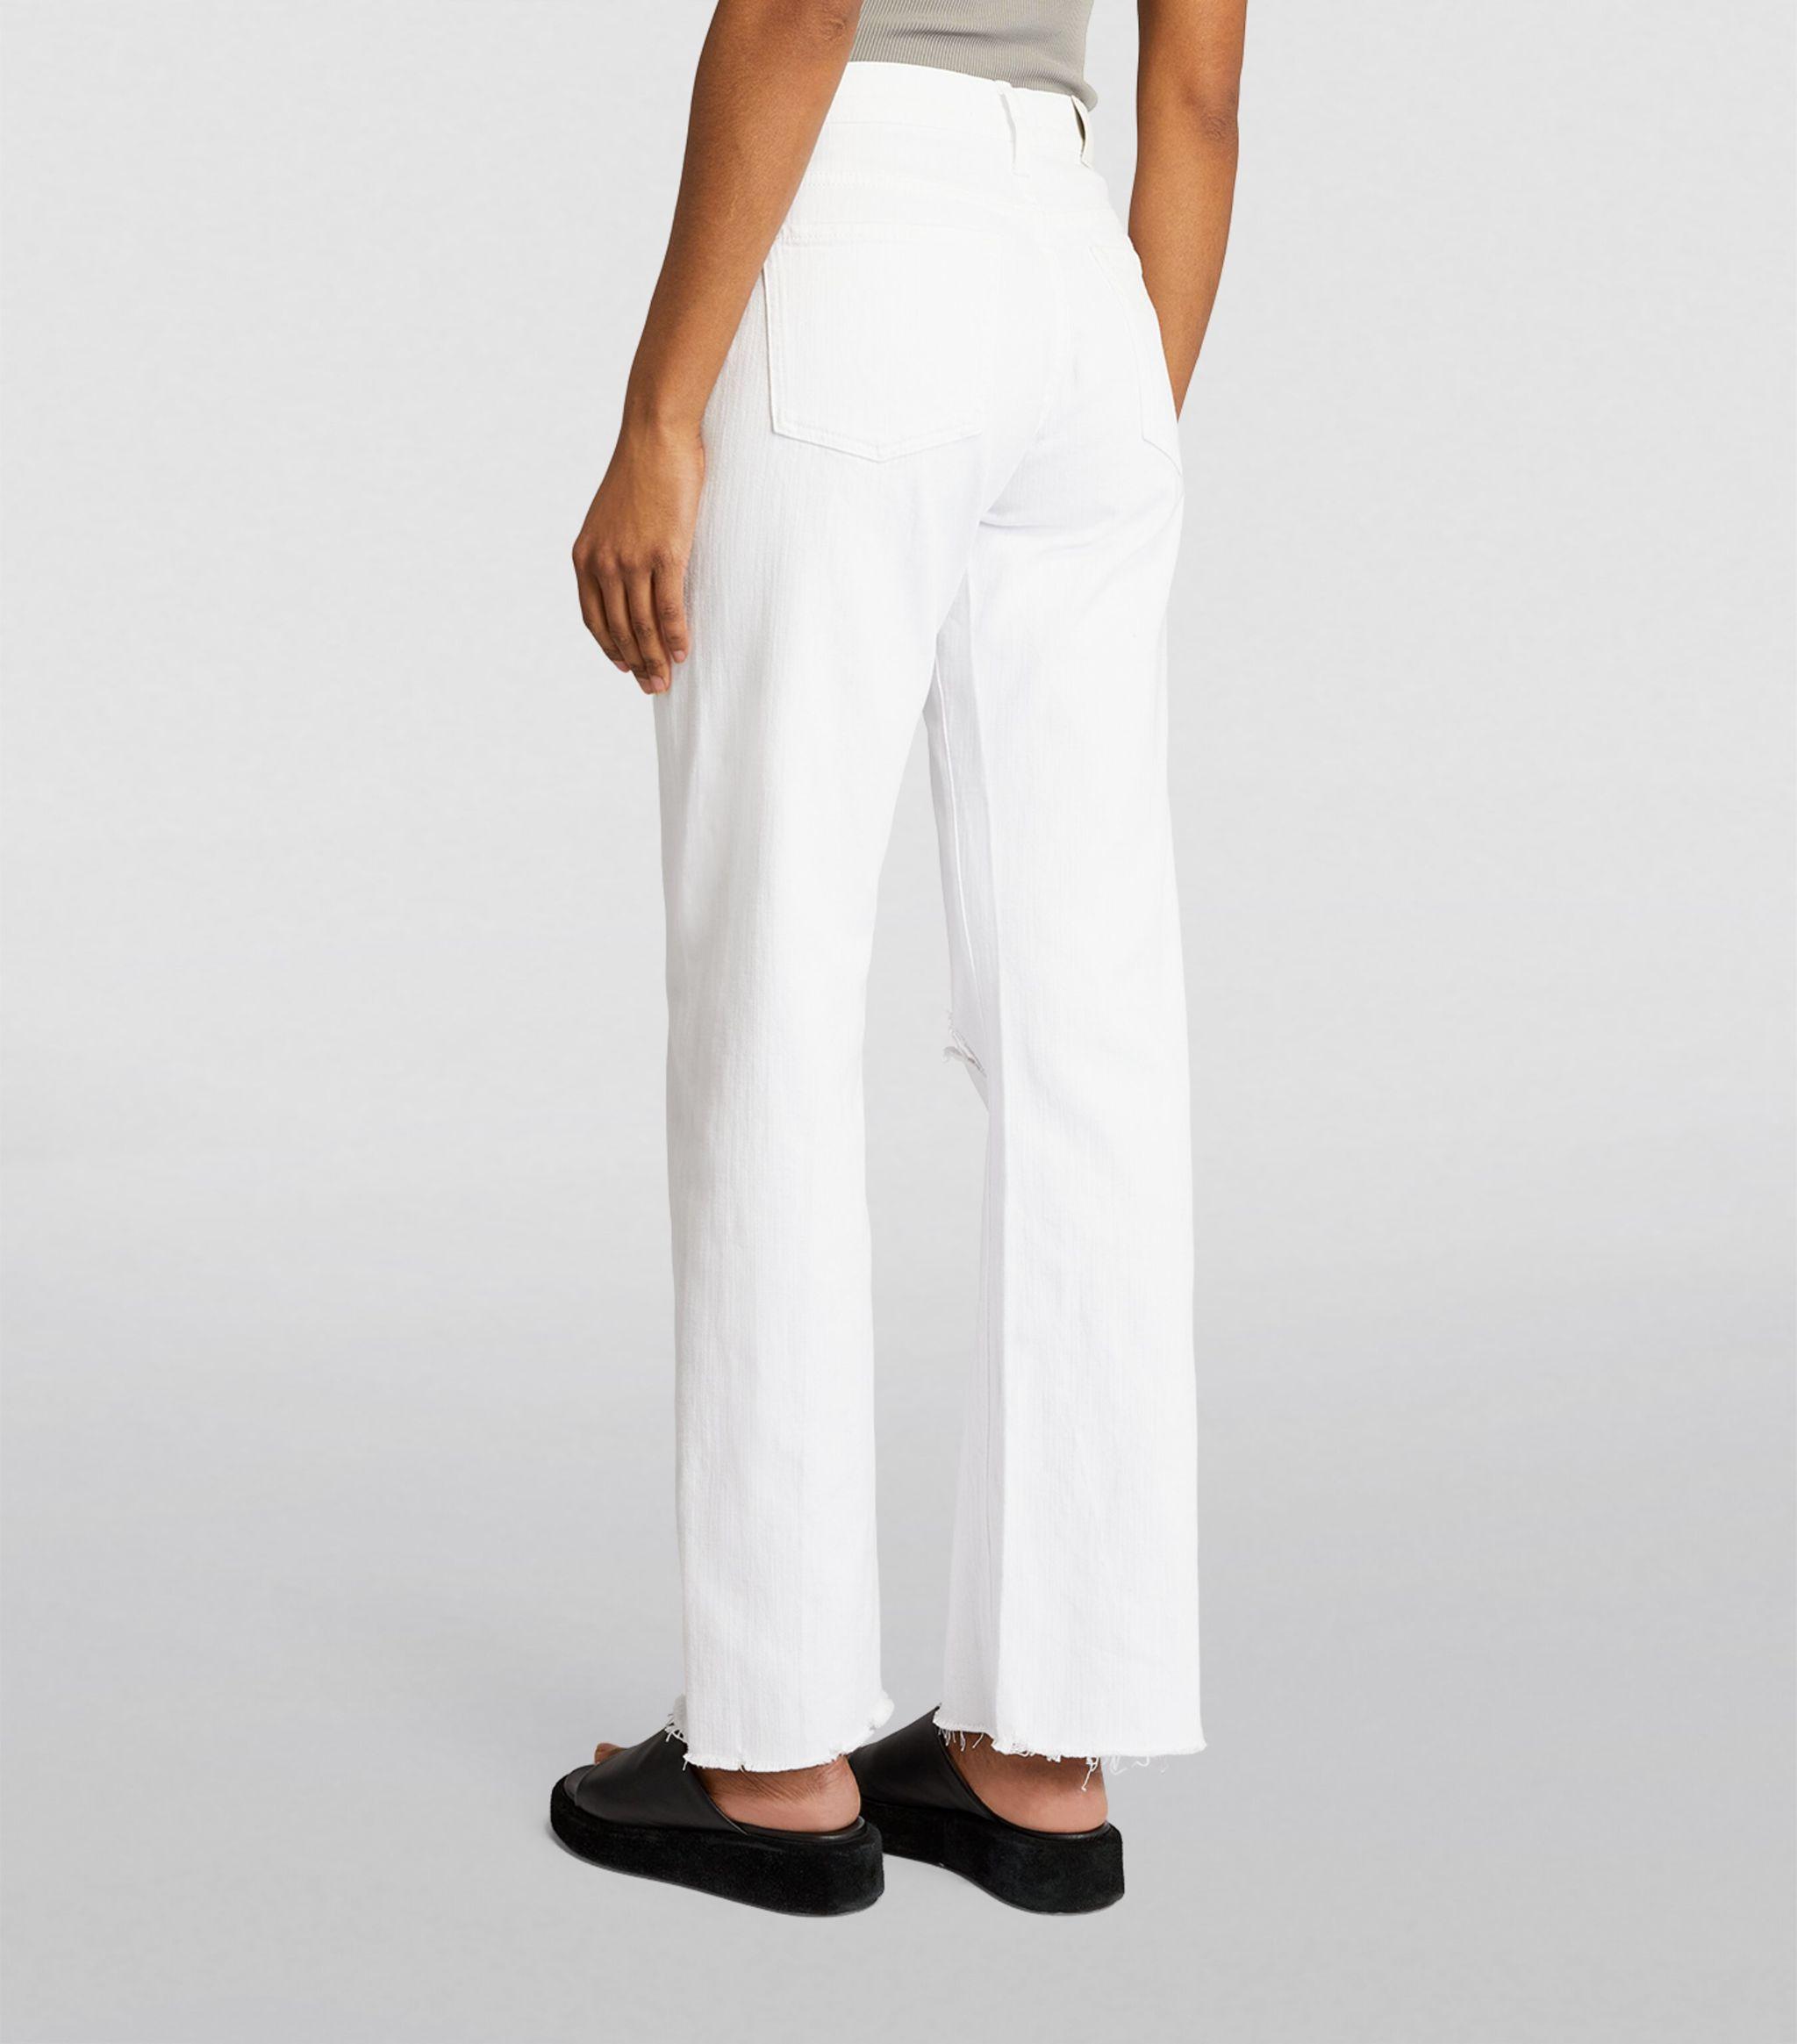 7 For All Mankind Tess High-rise Straight Jeans in White | Lyst